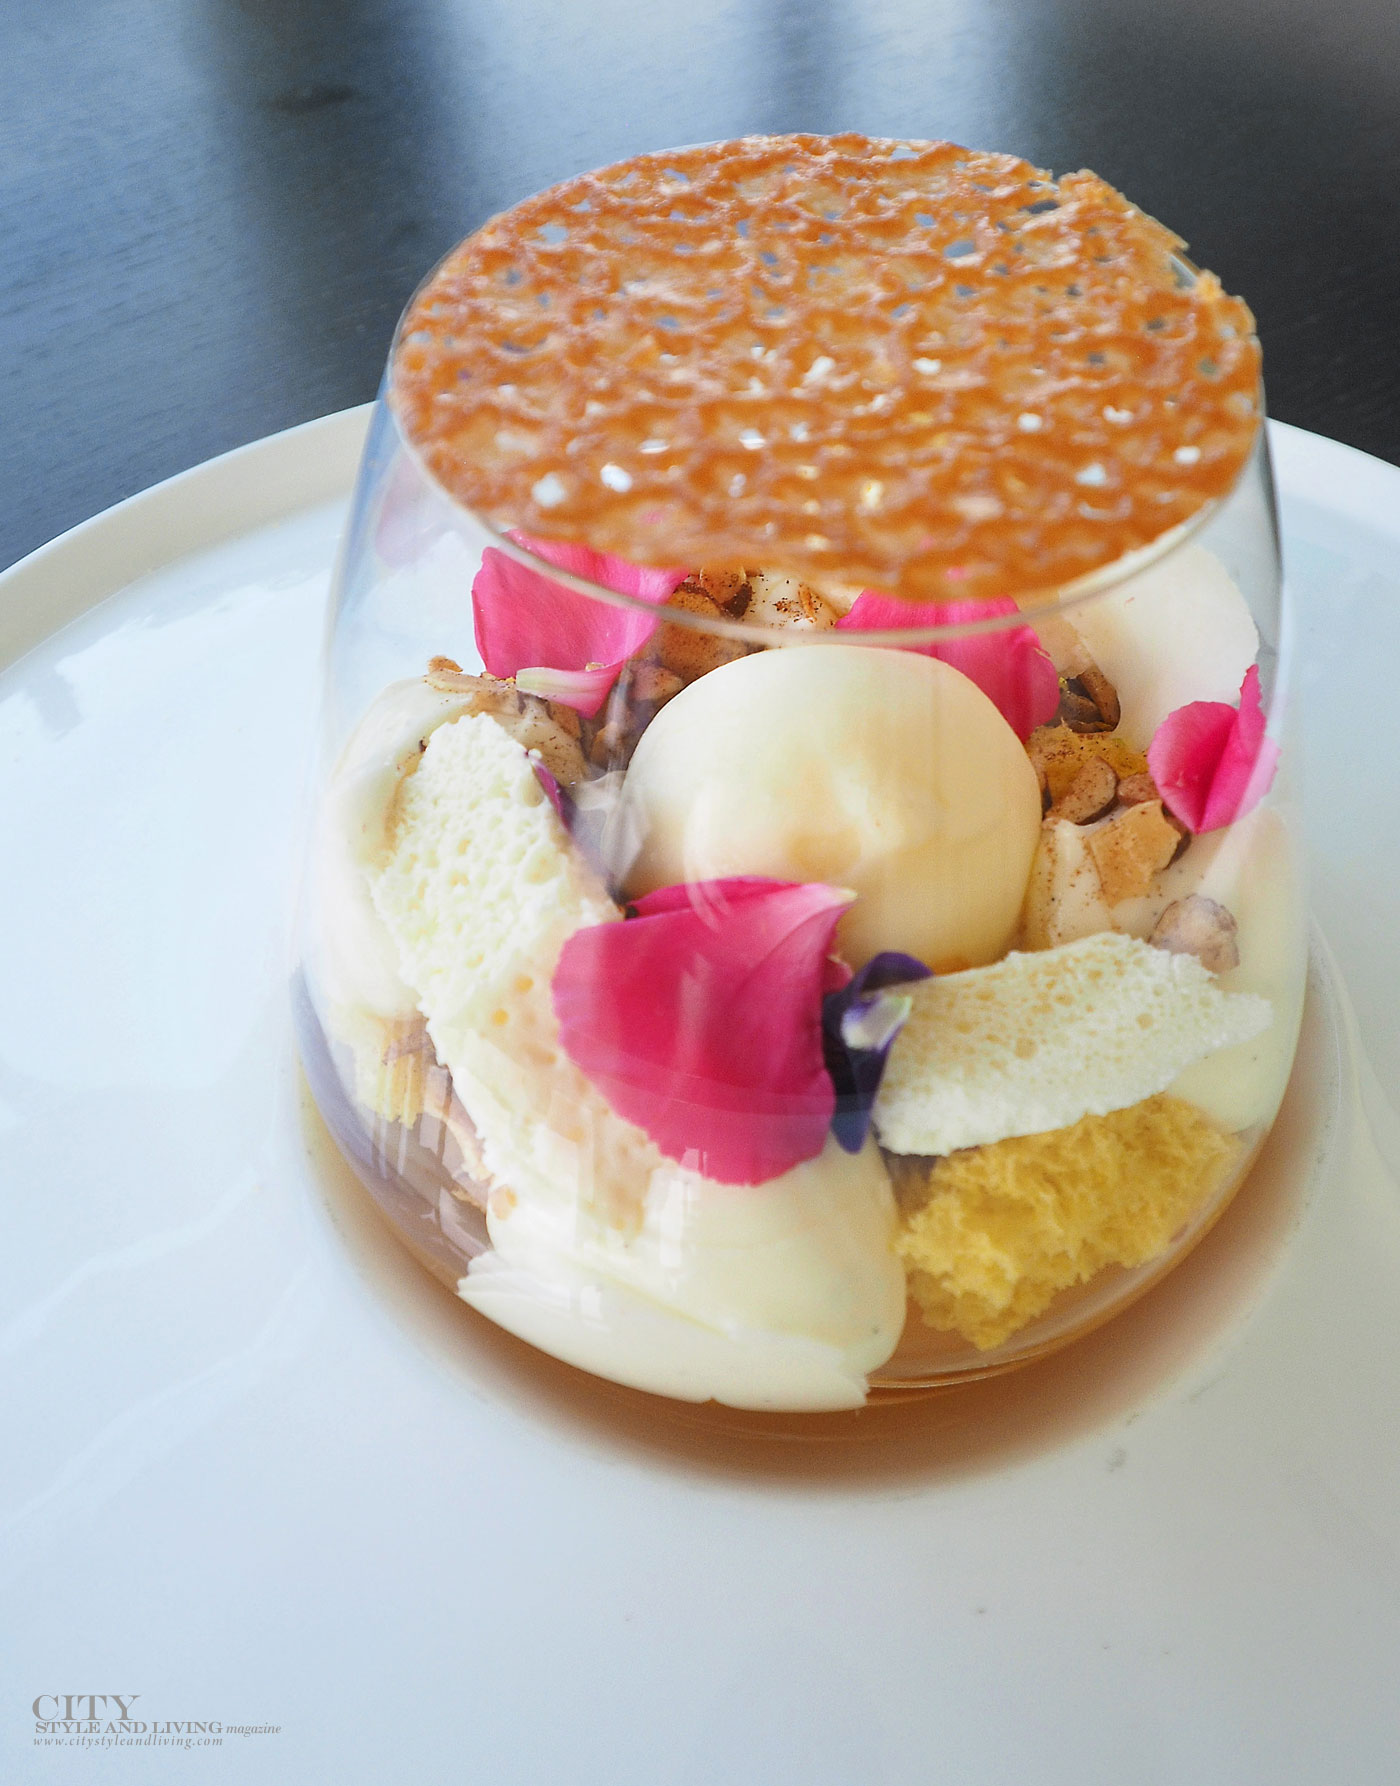 City Style and Living Magazine Elephant Hill Hawkes Bay New Zealand Dessert in Glass